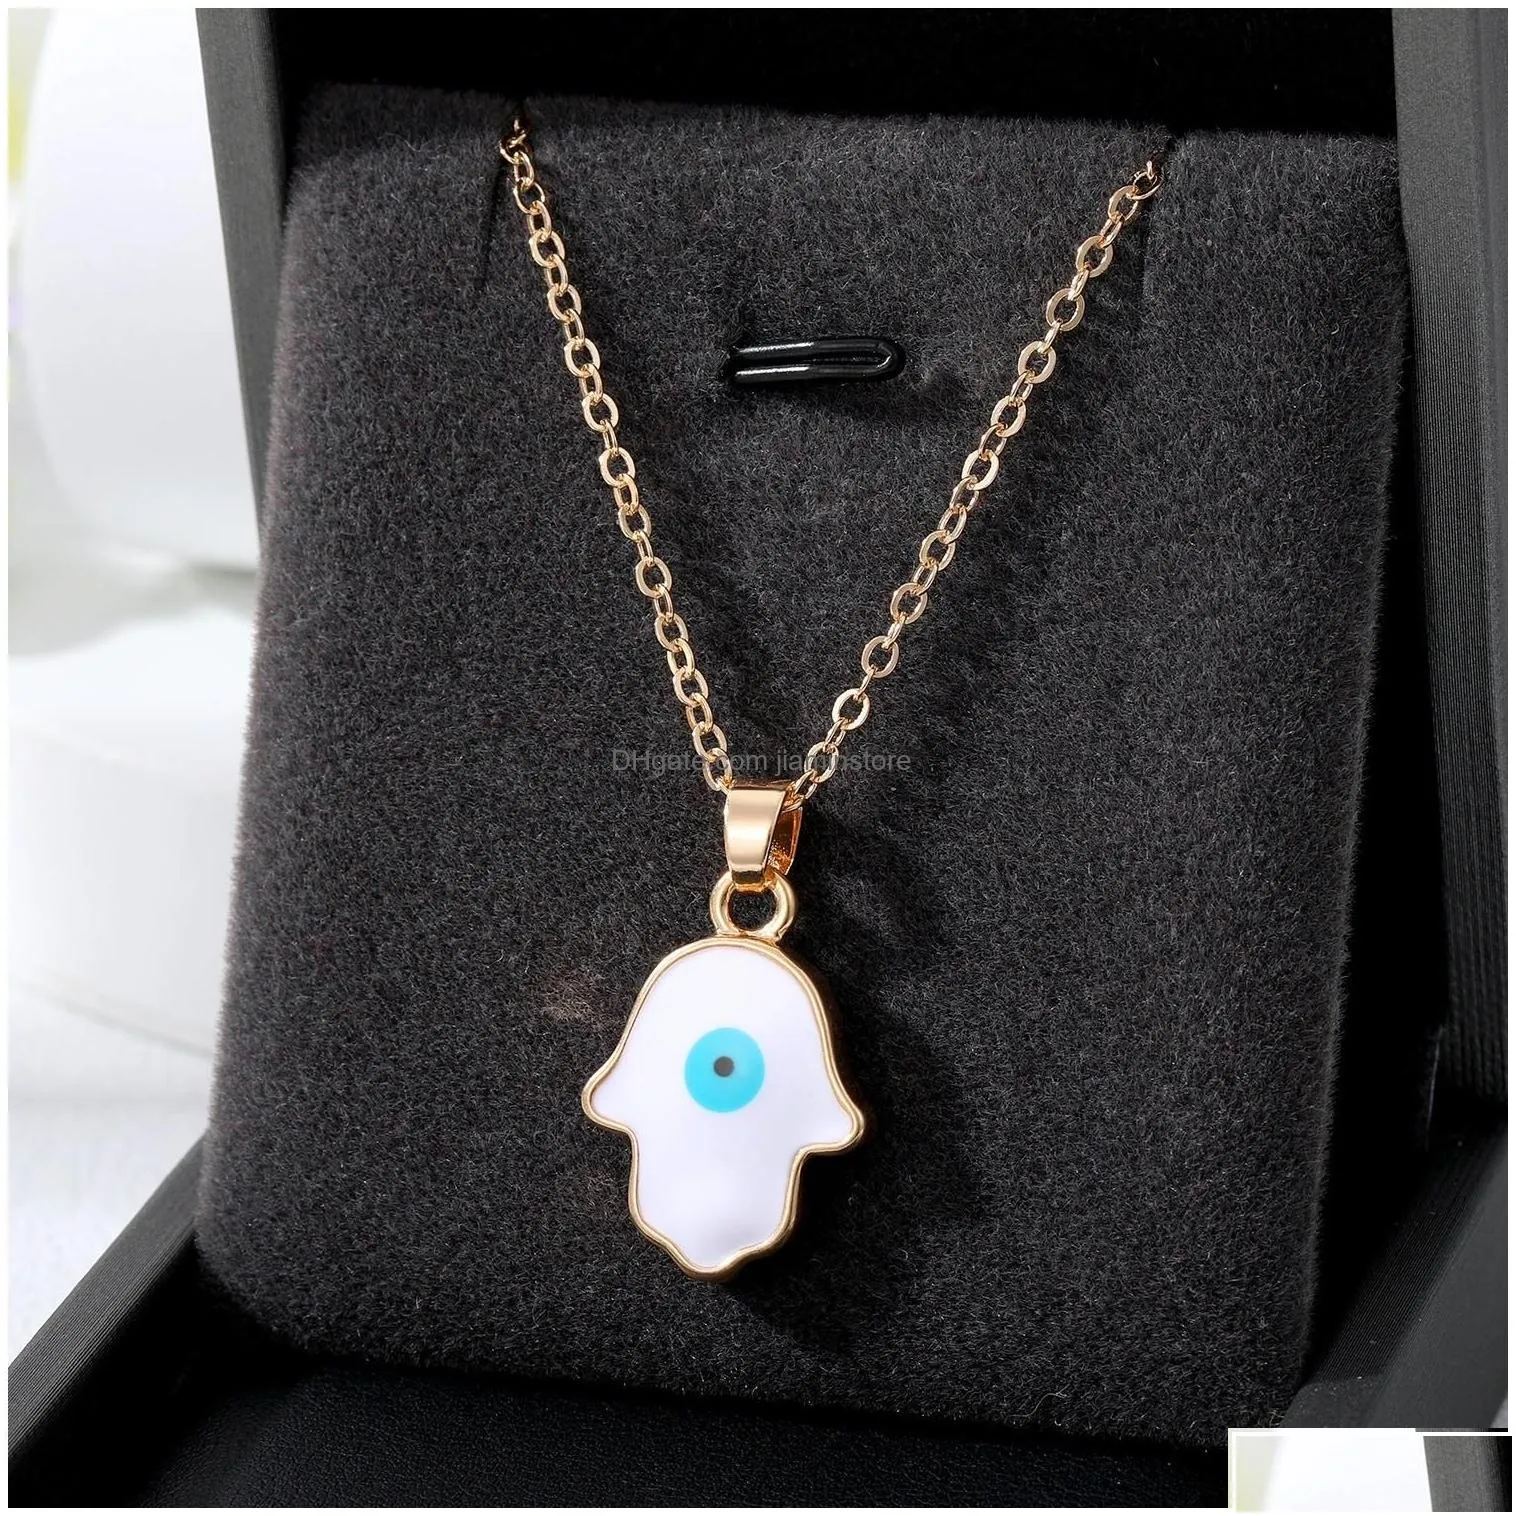 Pendant Necklaces Pendant Necklaces Colorf Turkish Blue Evil Eye Palm Hand Necklace For Women New Trendy Lucky Clavicle Chain Choker J Dht8F